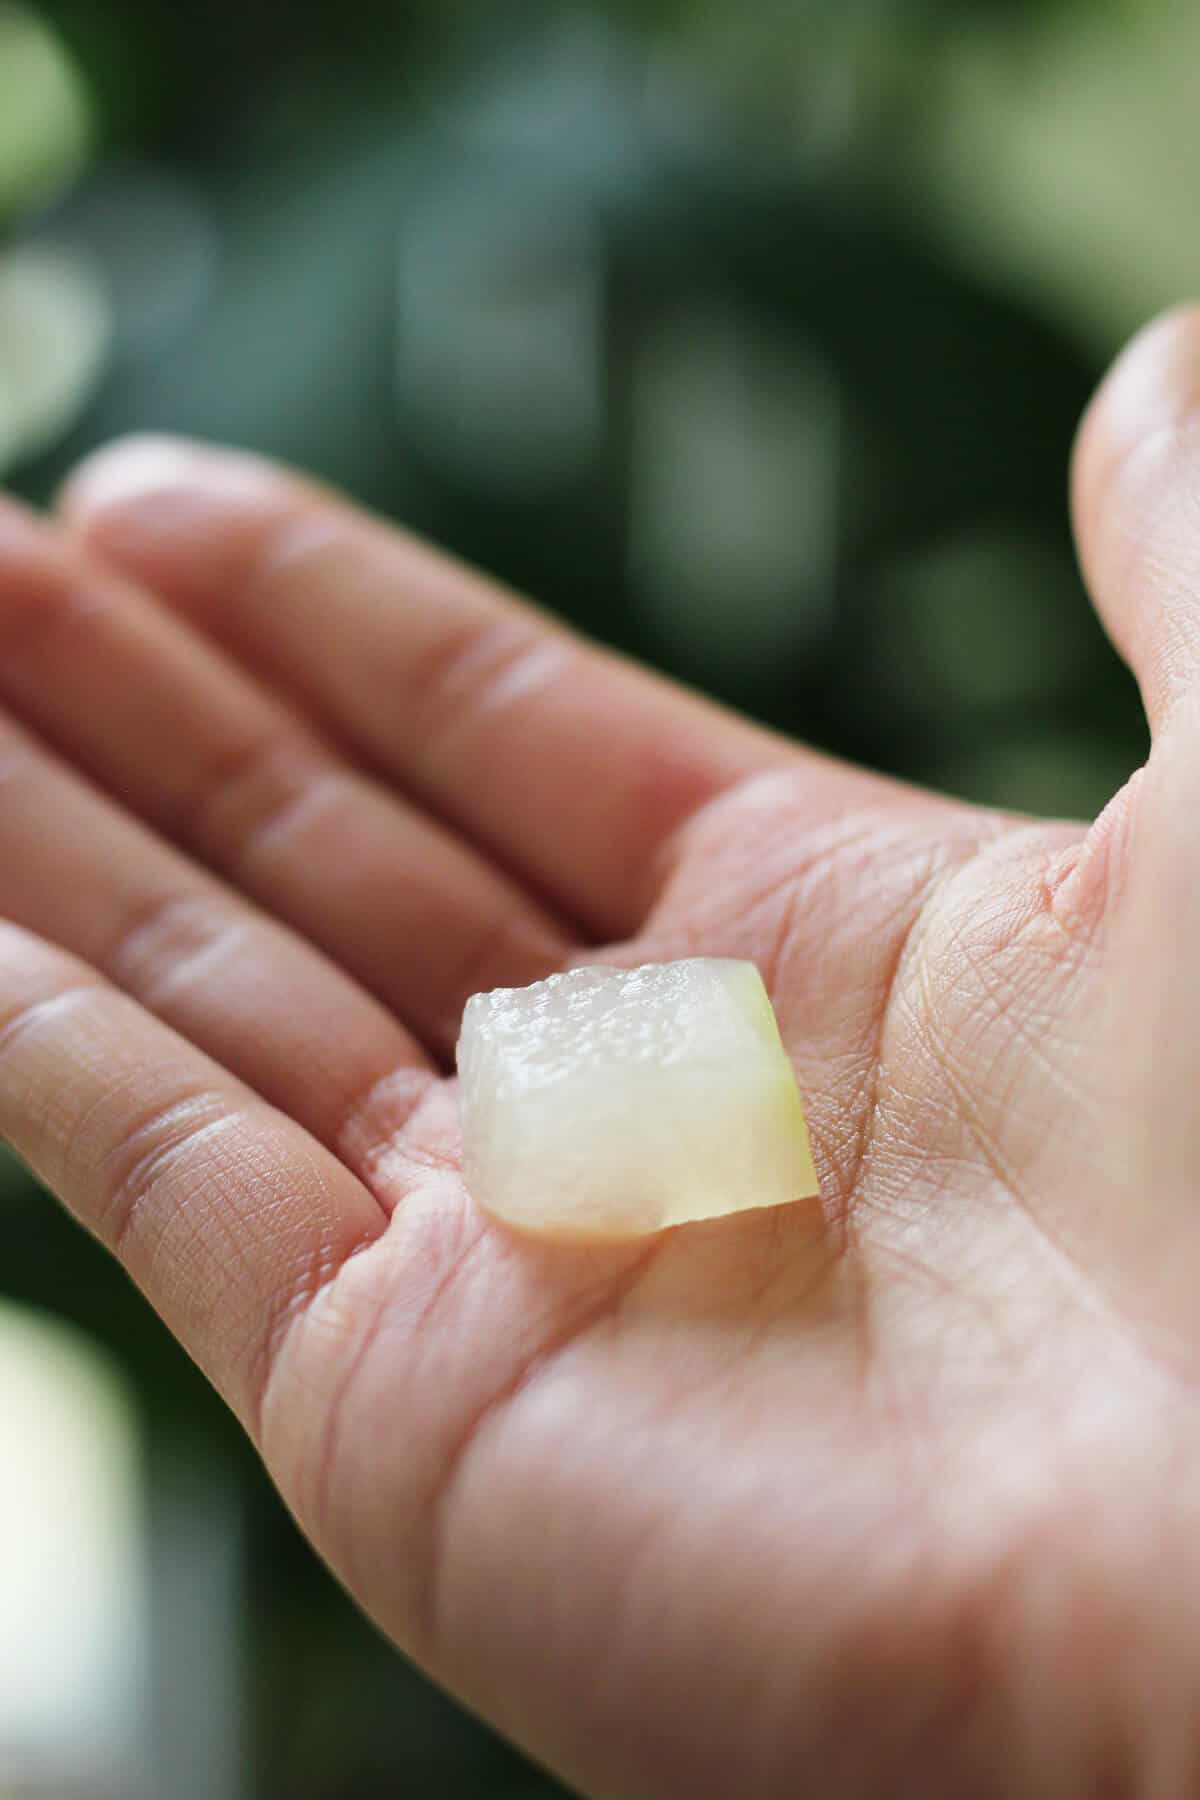 Hand holding semi-translucent cube of cooked wintermelon.